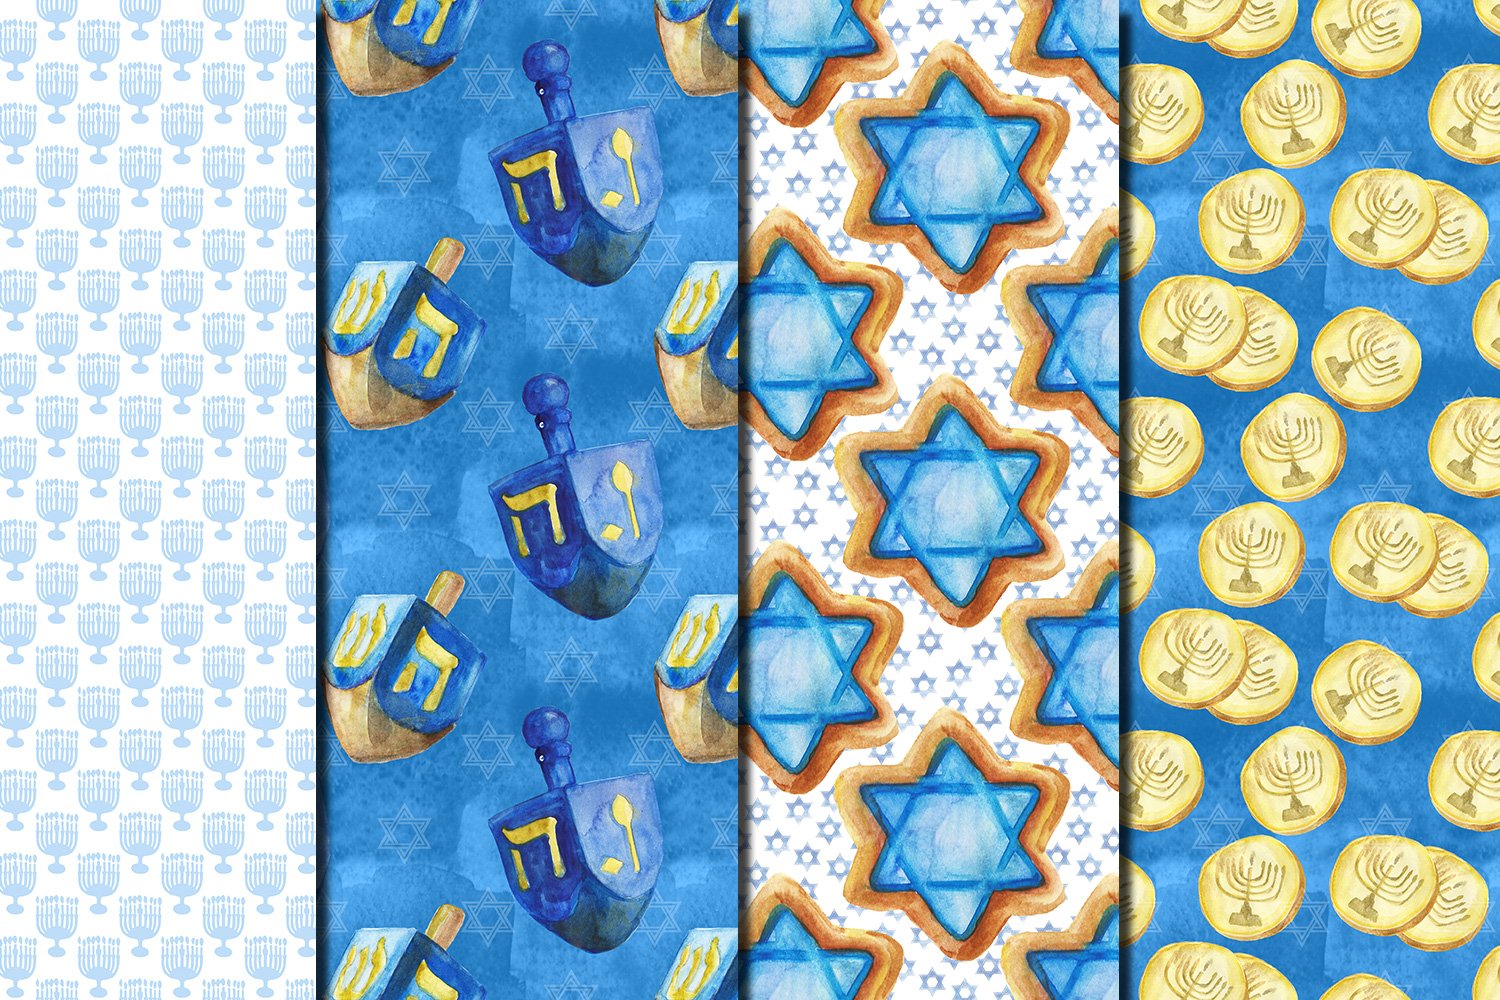 Hanukkah-themed images with stars and more.